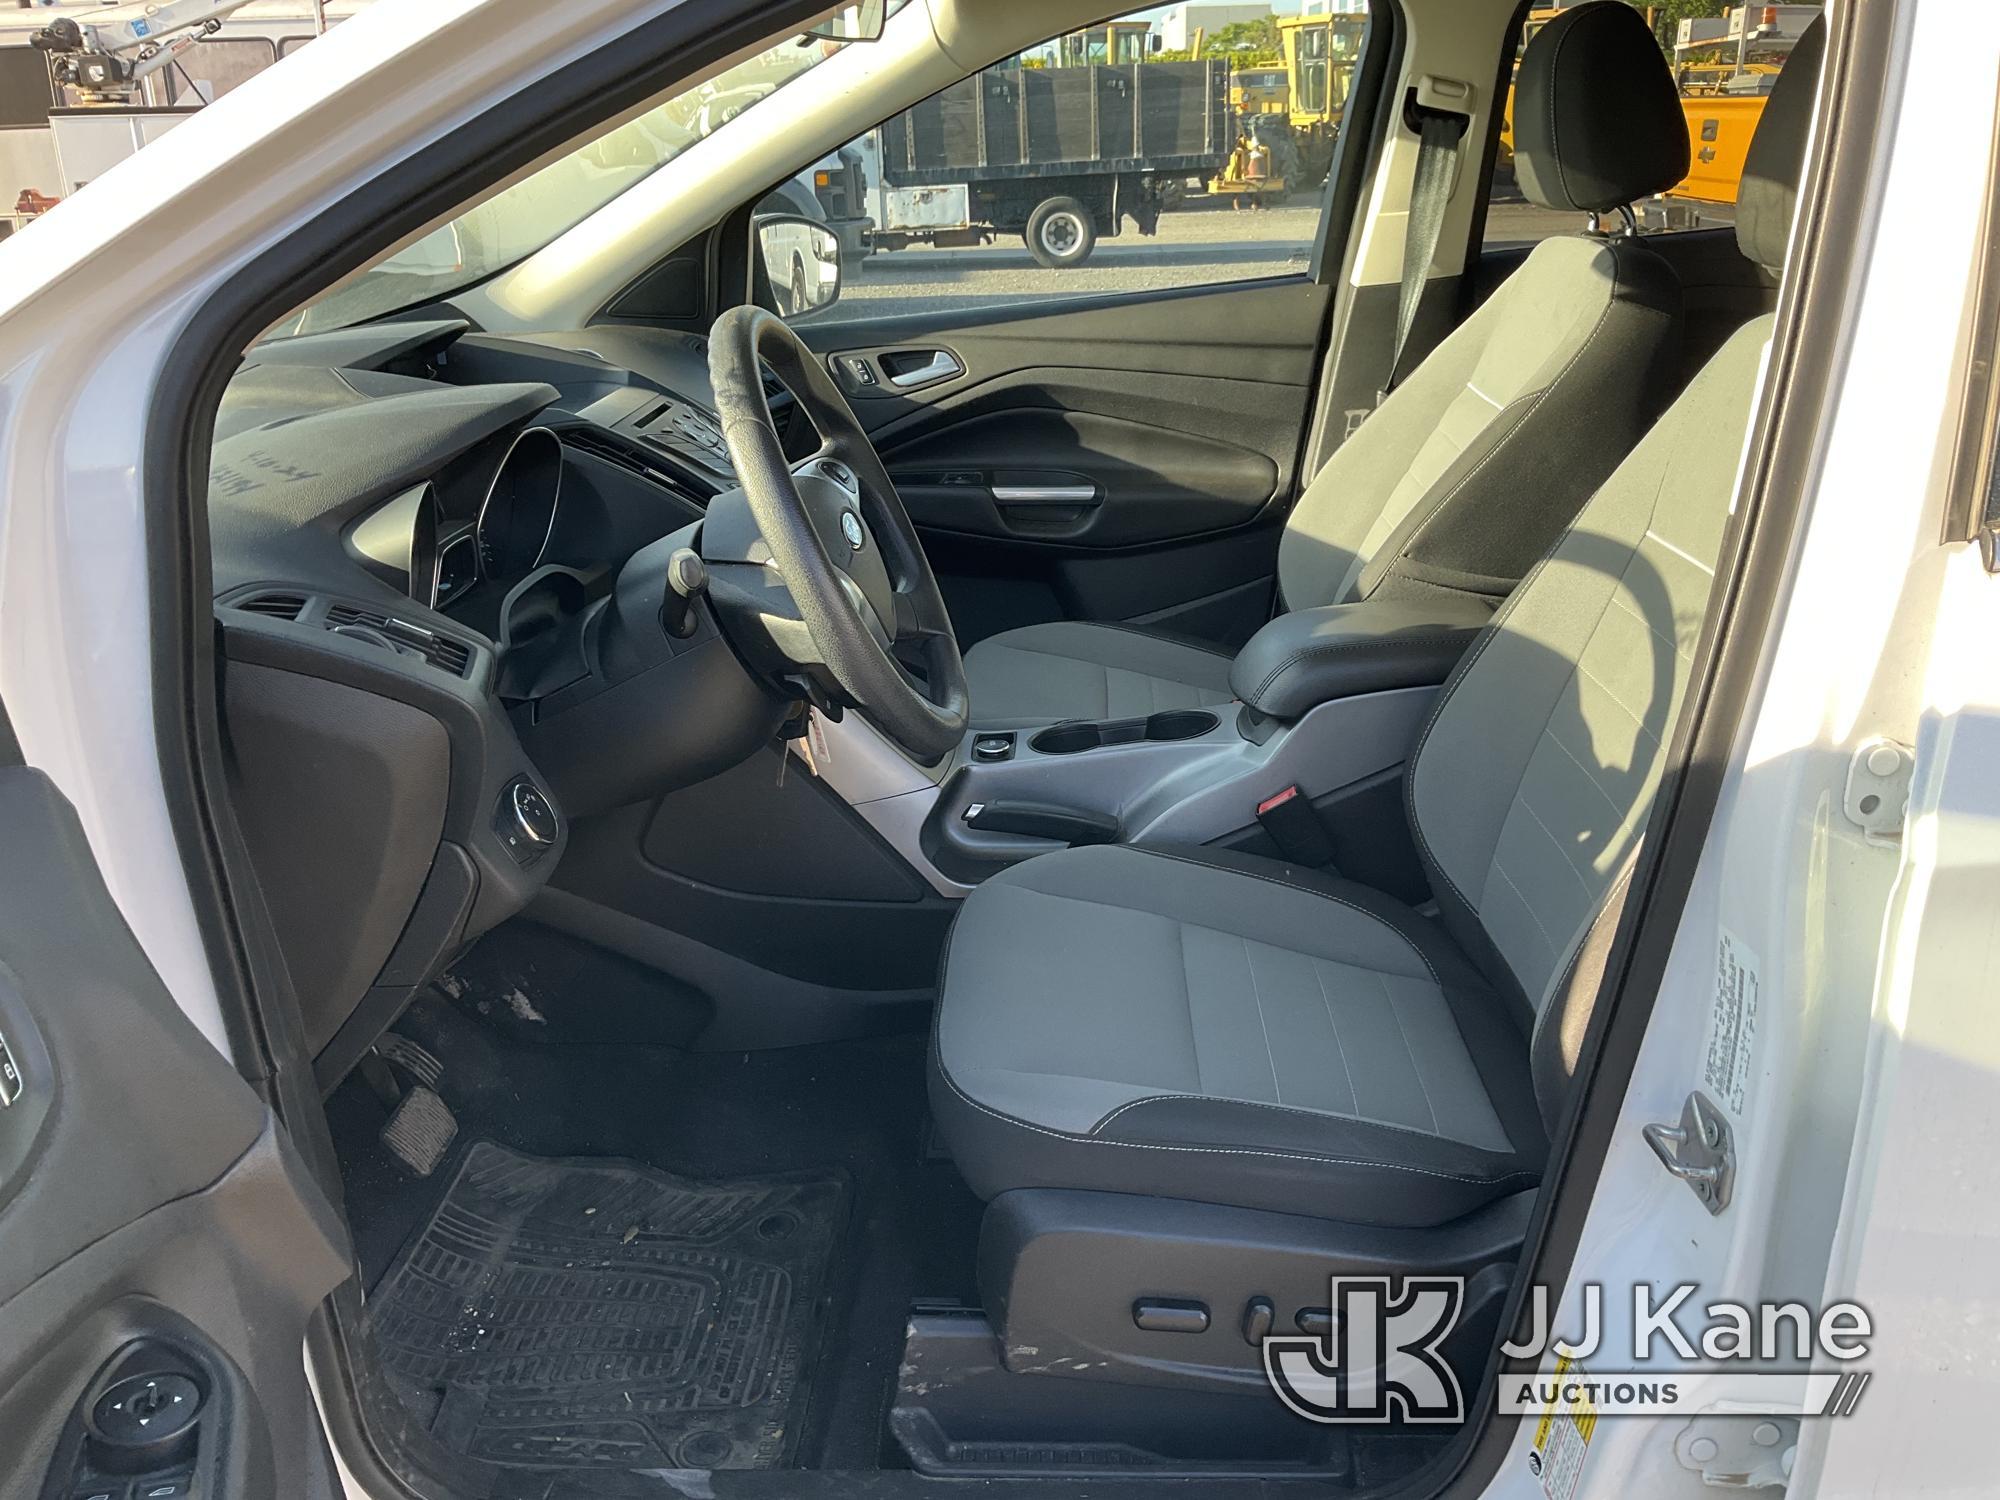 (Jurupa Valley, CA) 2014 Ford Escape AWD Sport Utility Vehicle Not Running, Has Check Engine Light O